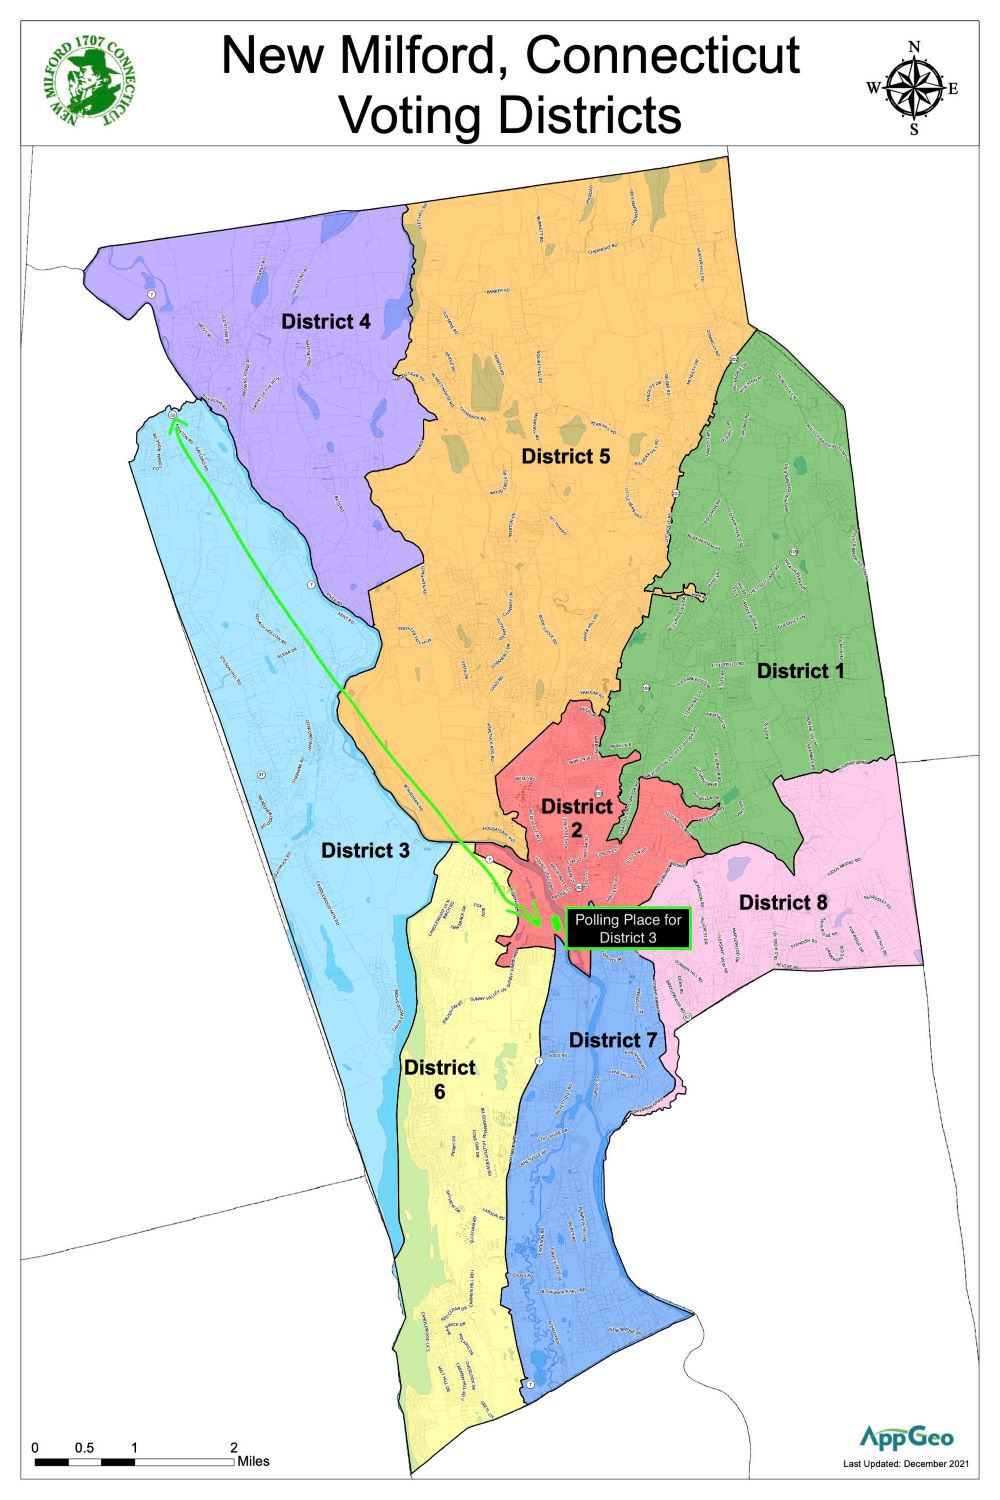 New Milford Voting Districts